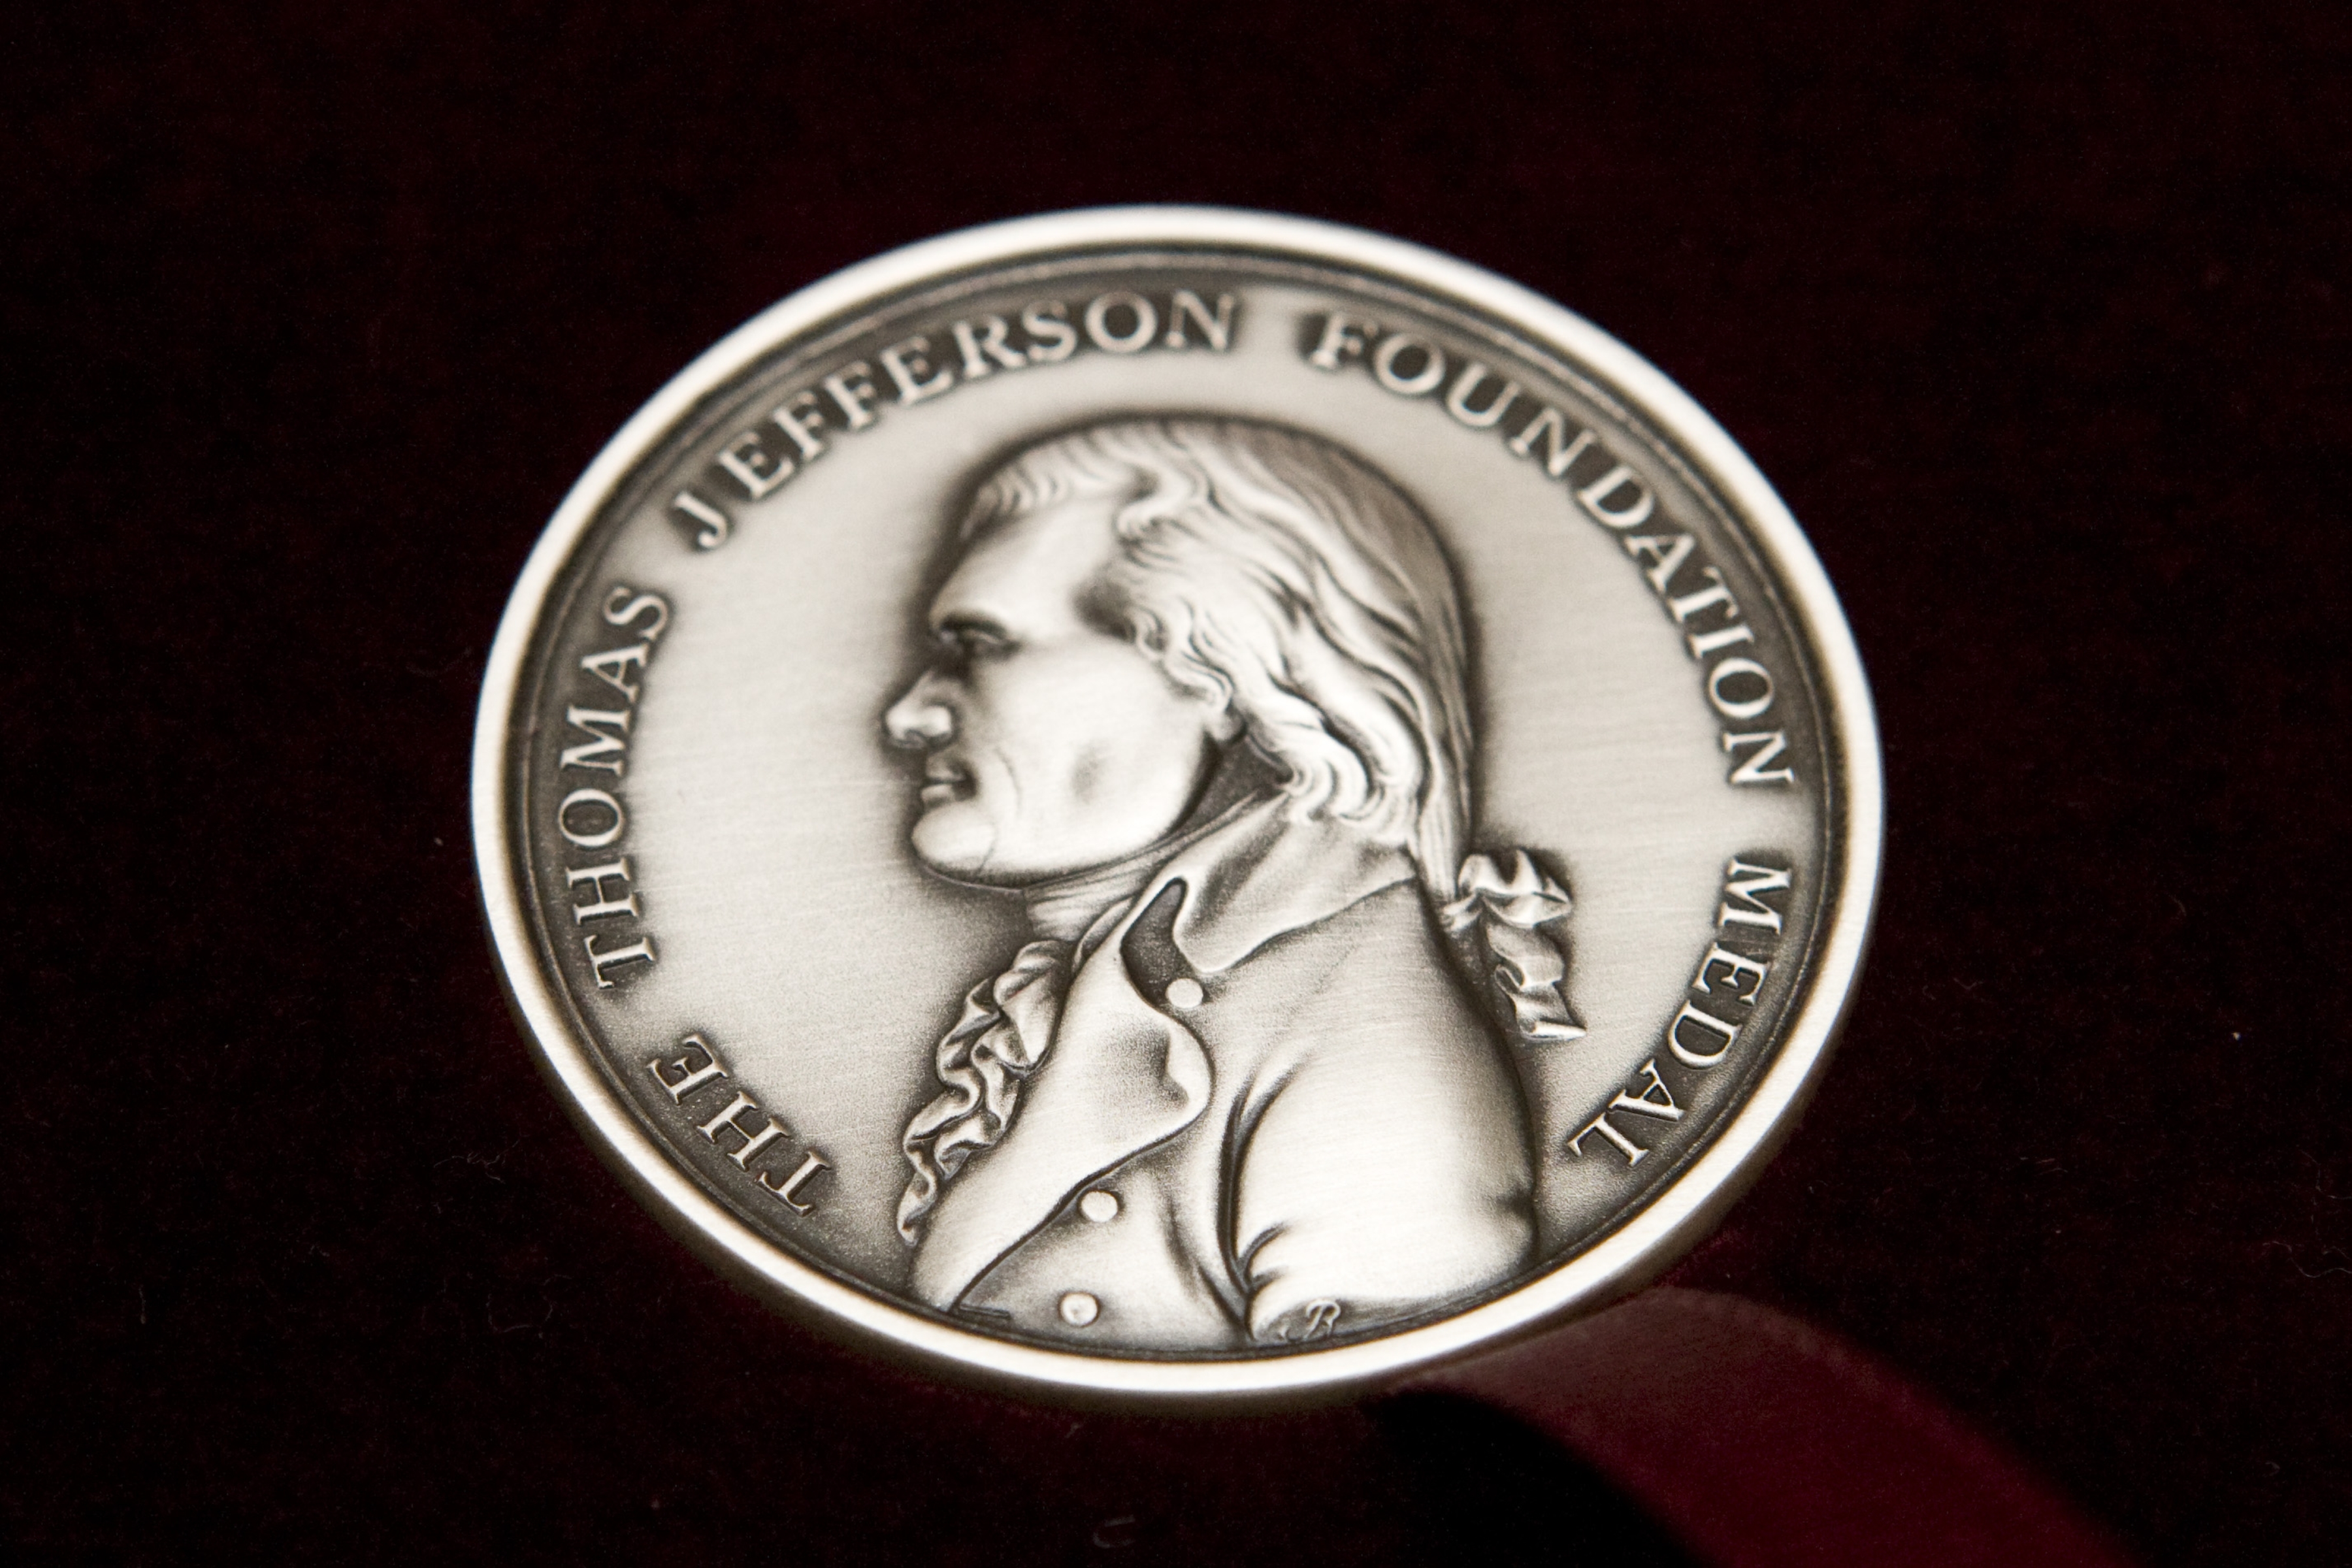 The Thomas Jefferson Foundation Medal with the head of Jefferson on it